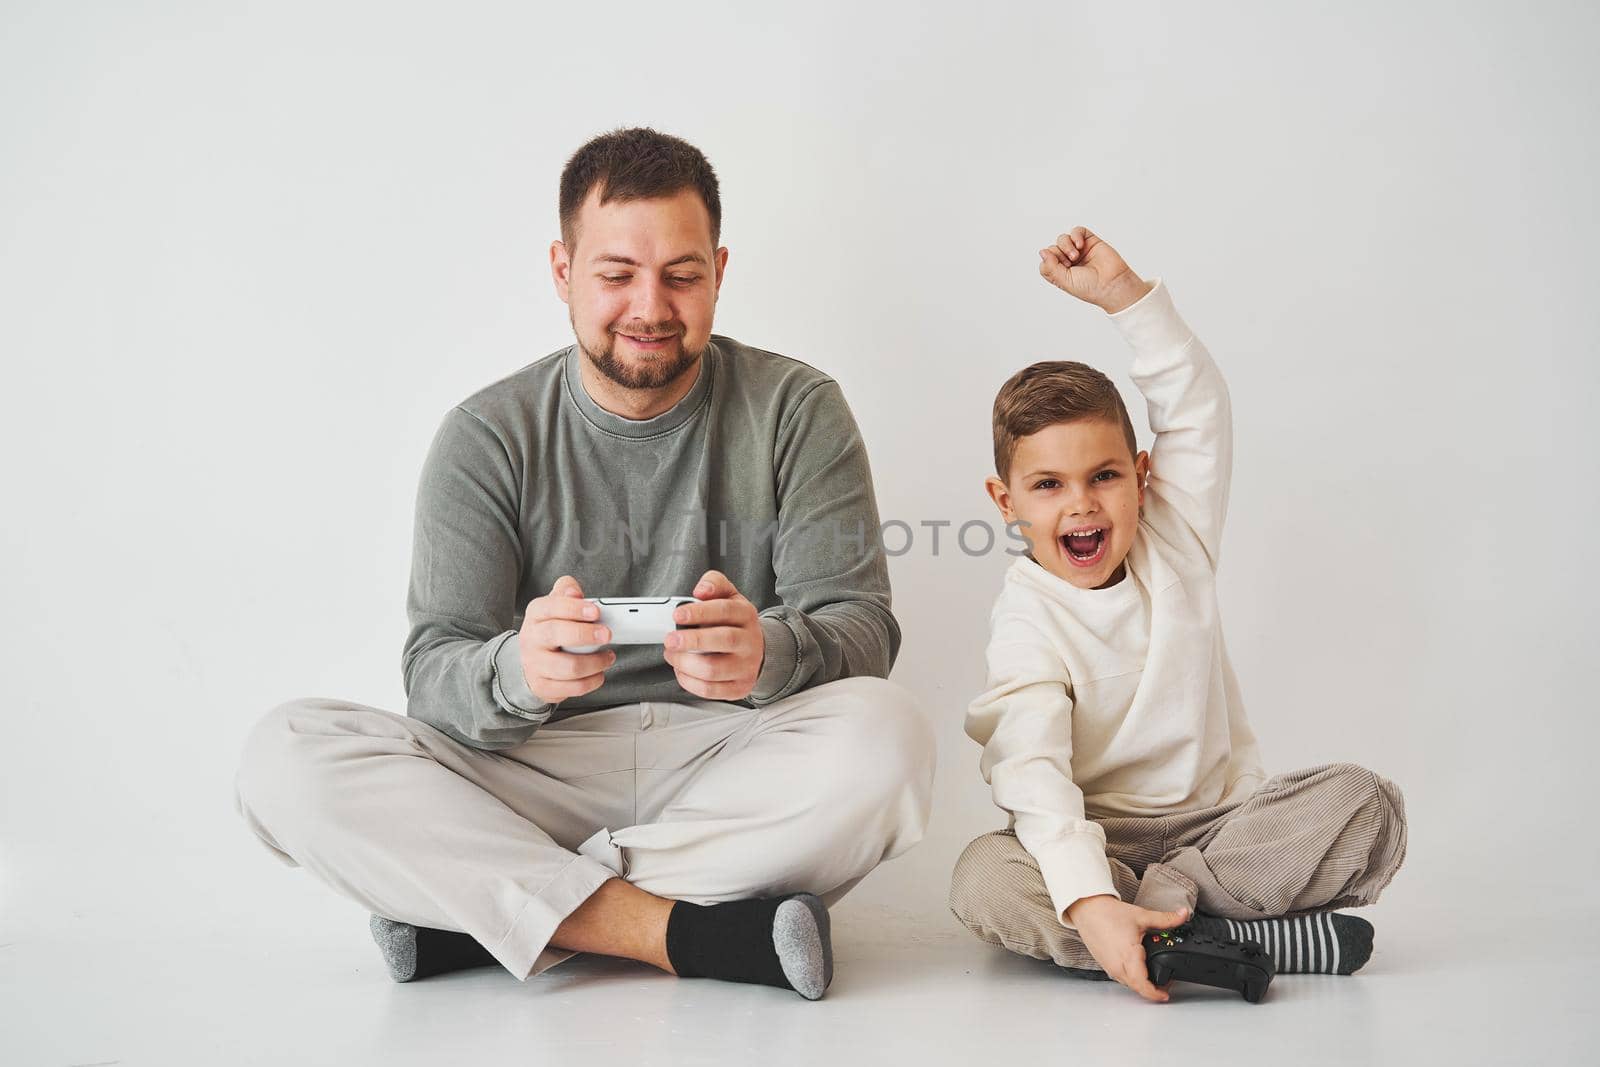 Son won father in game on console. Happy child with gamepad raises his hands up and rejoices in the victory in the game. by Rabizo